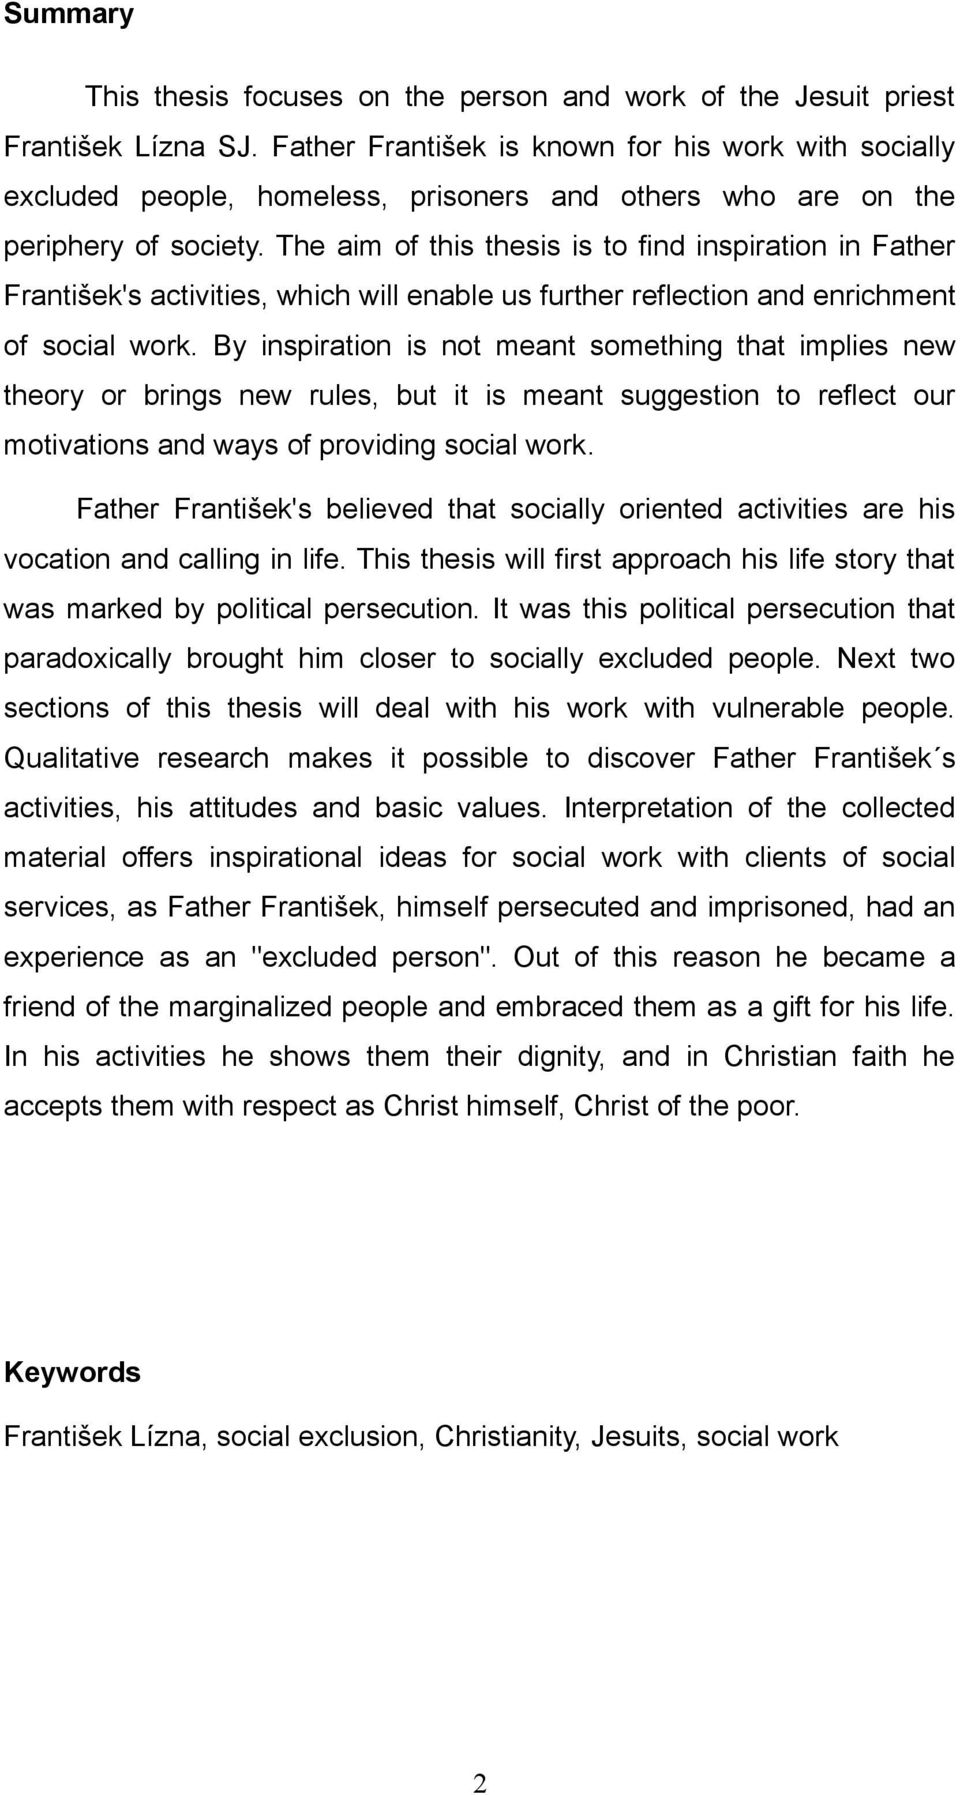 The aim of this thesis is to find inspiration in Father František's activities, which will enable us further reflection and enrichment of social work.